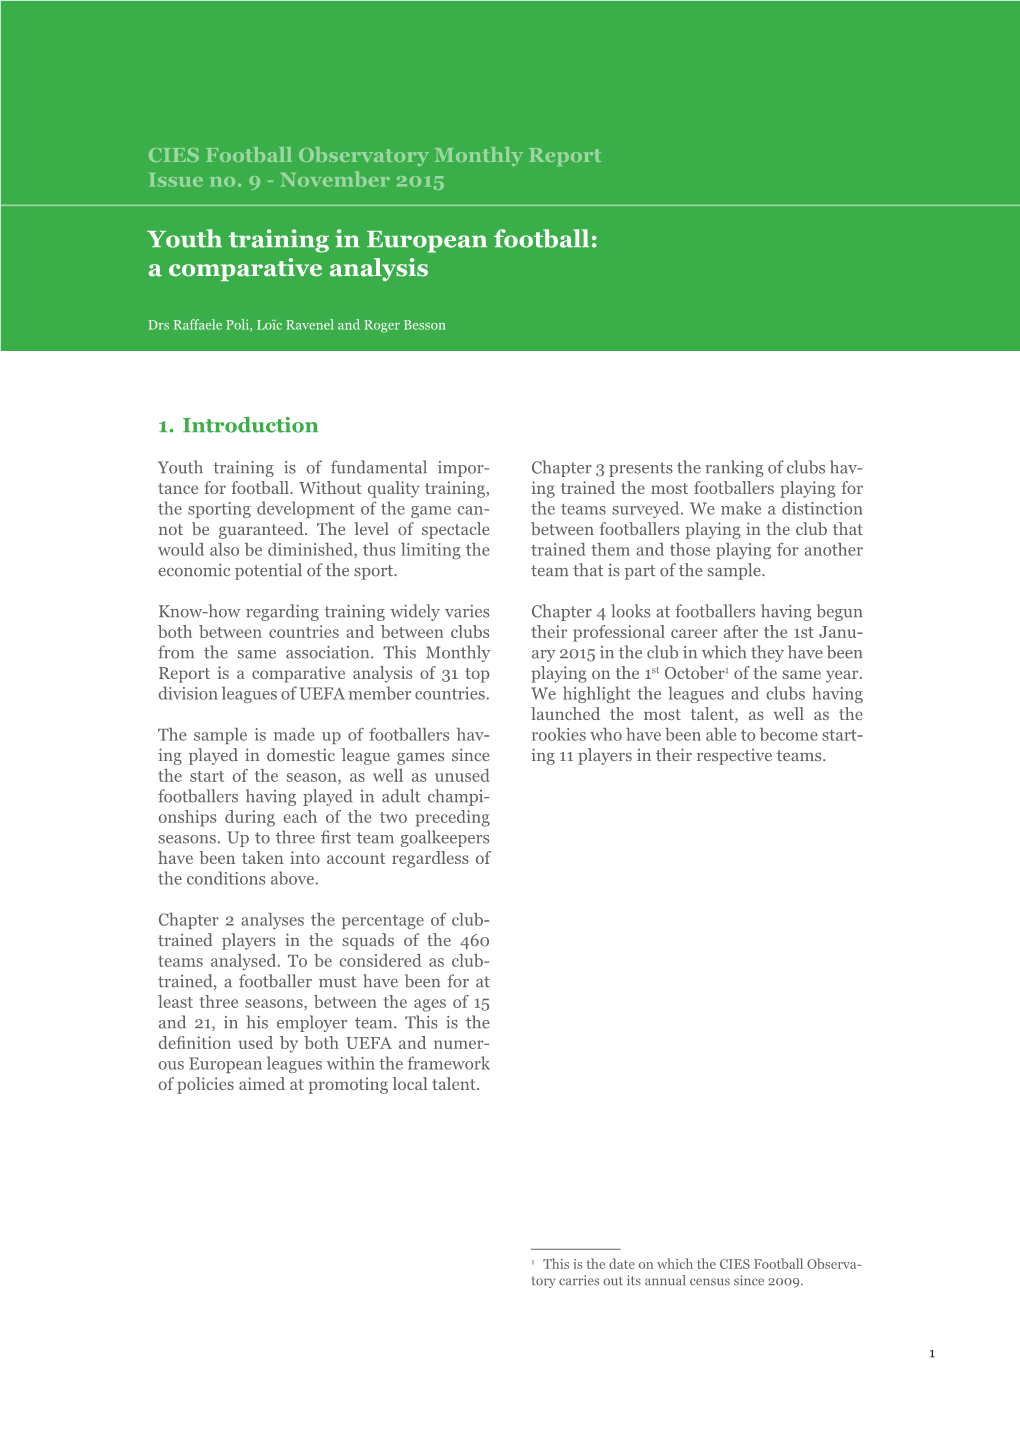 Youth Training in European Football: a Comparative Analysis